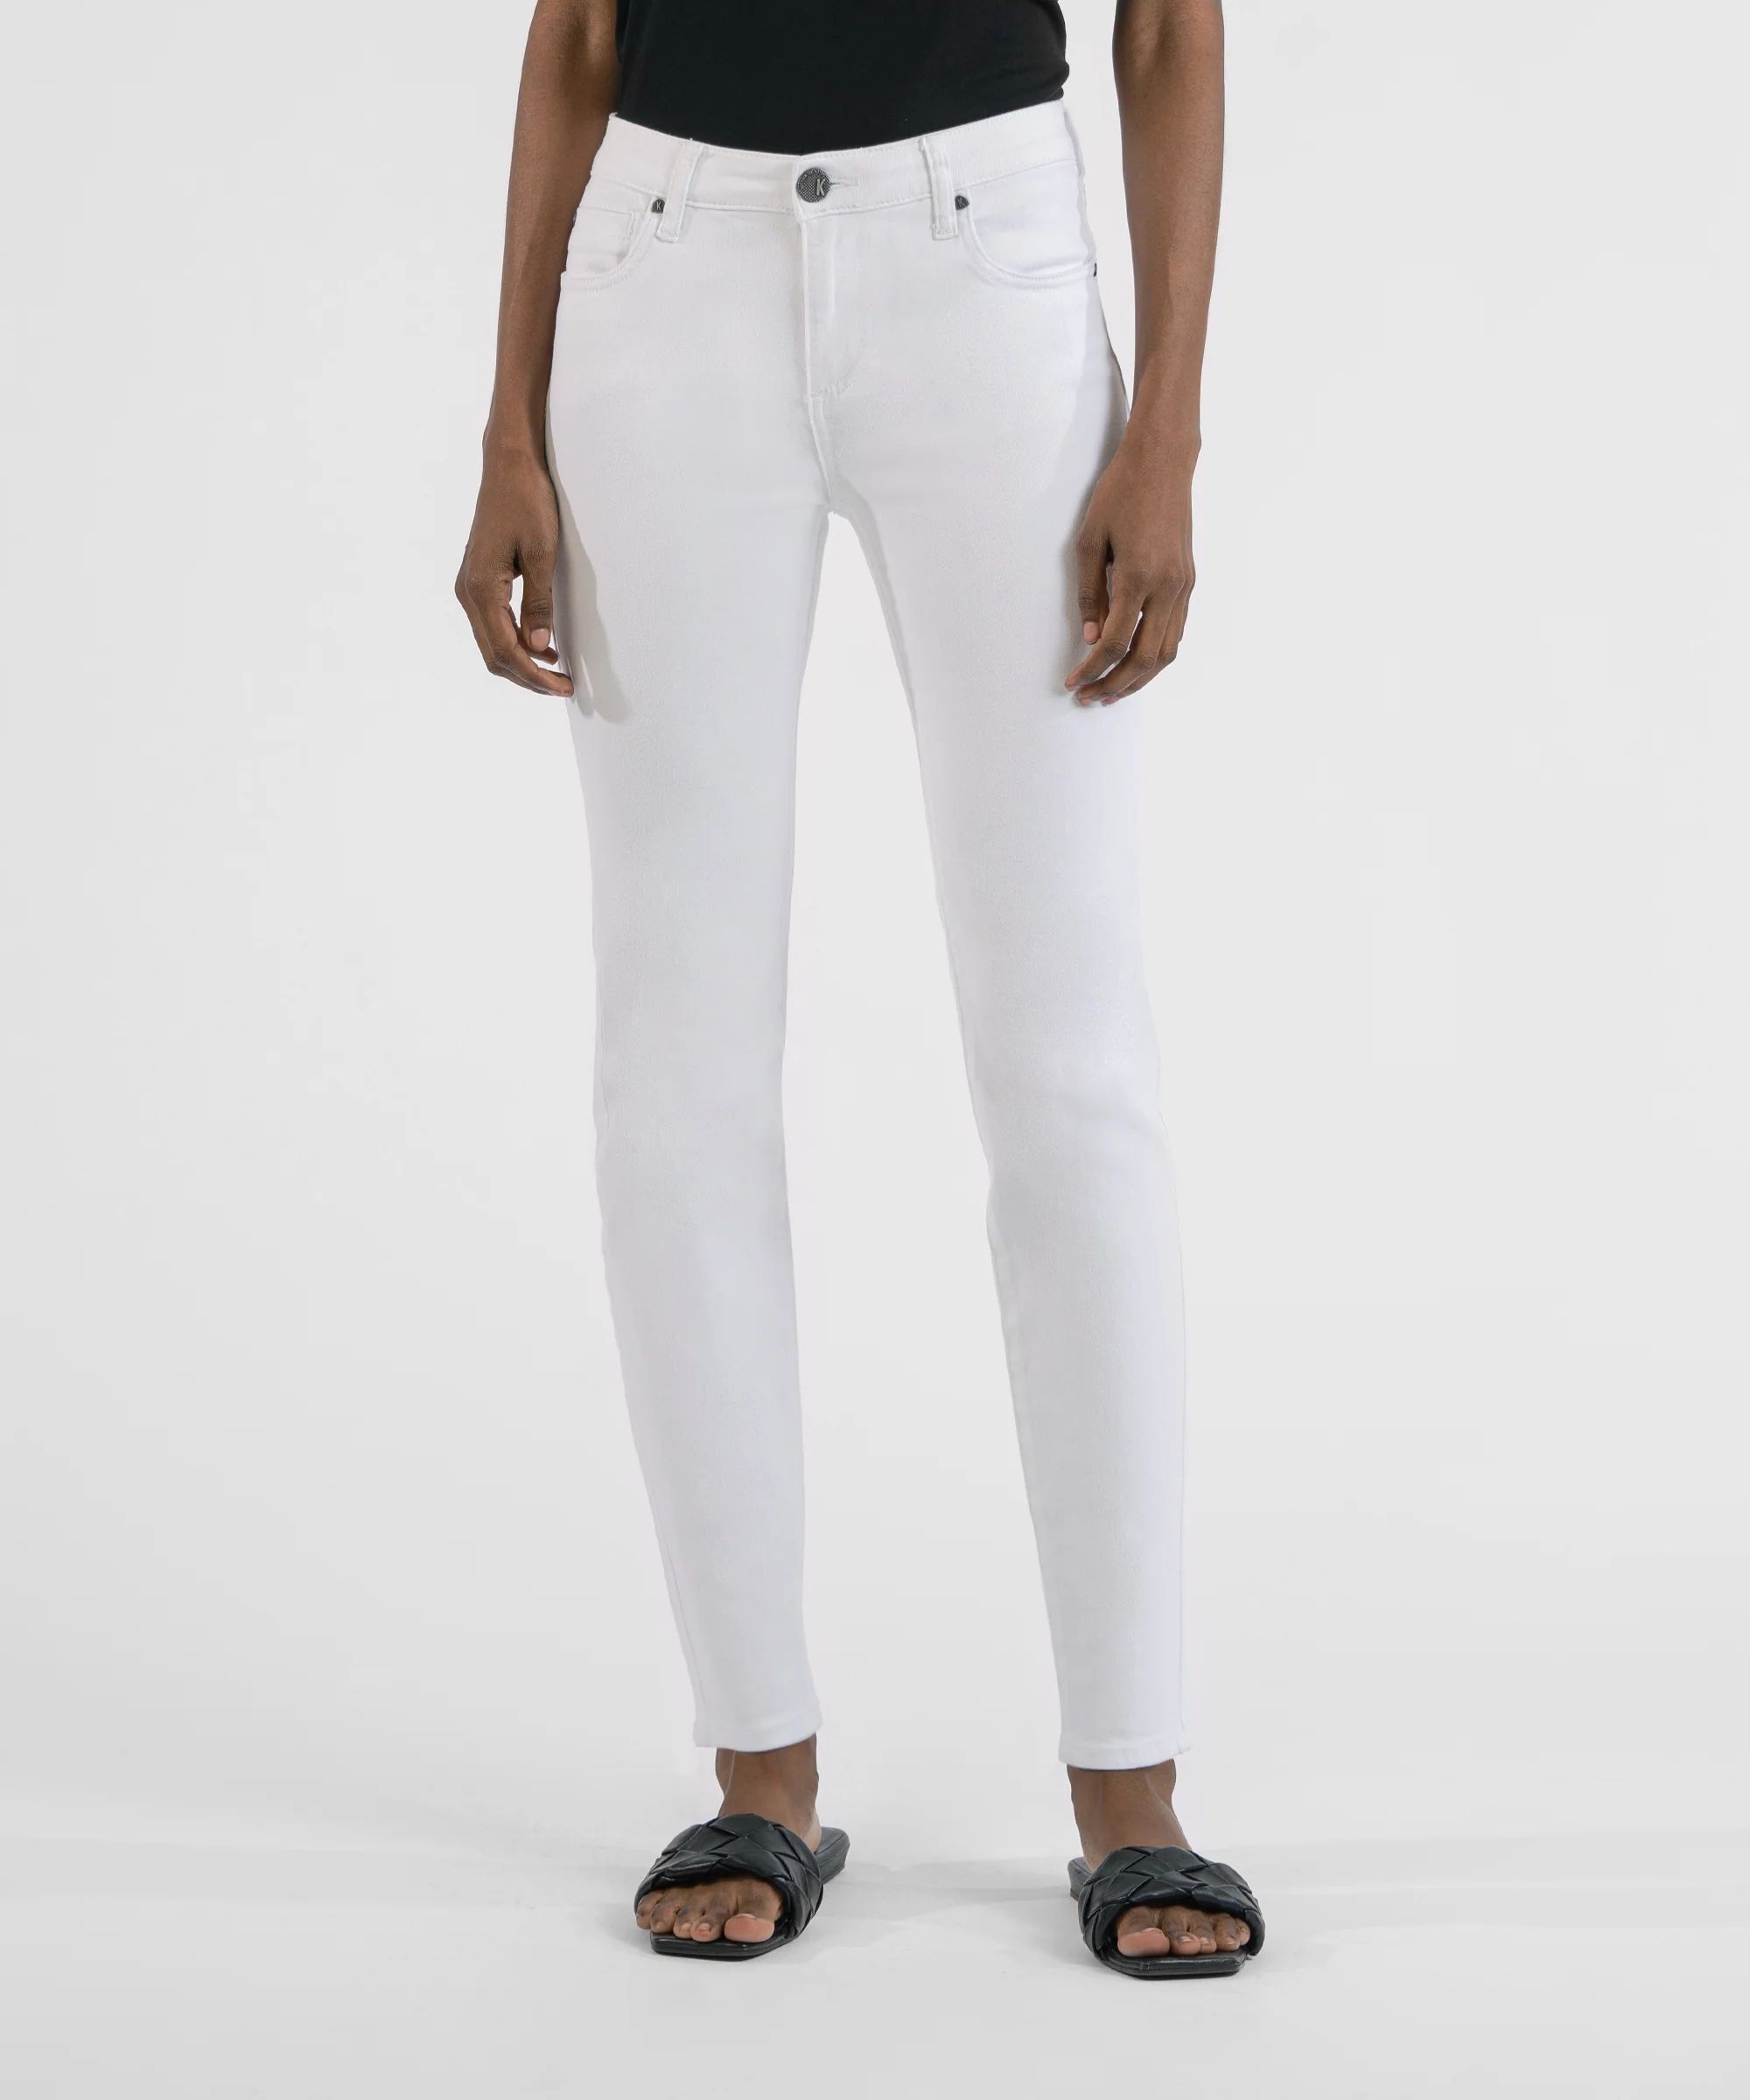 Diana Mid Rise Relaxed Fit Skinny, Exclusive (White) - Kut from the Kloth | Kut From Kloth